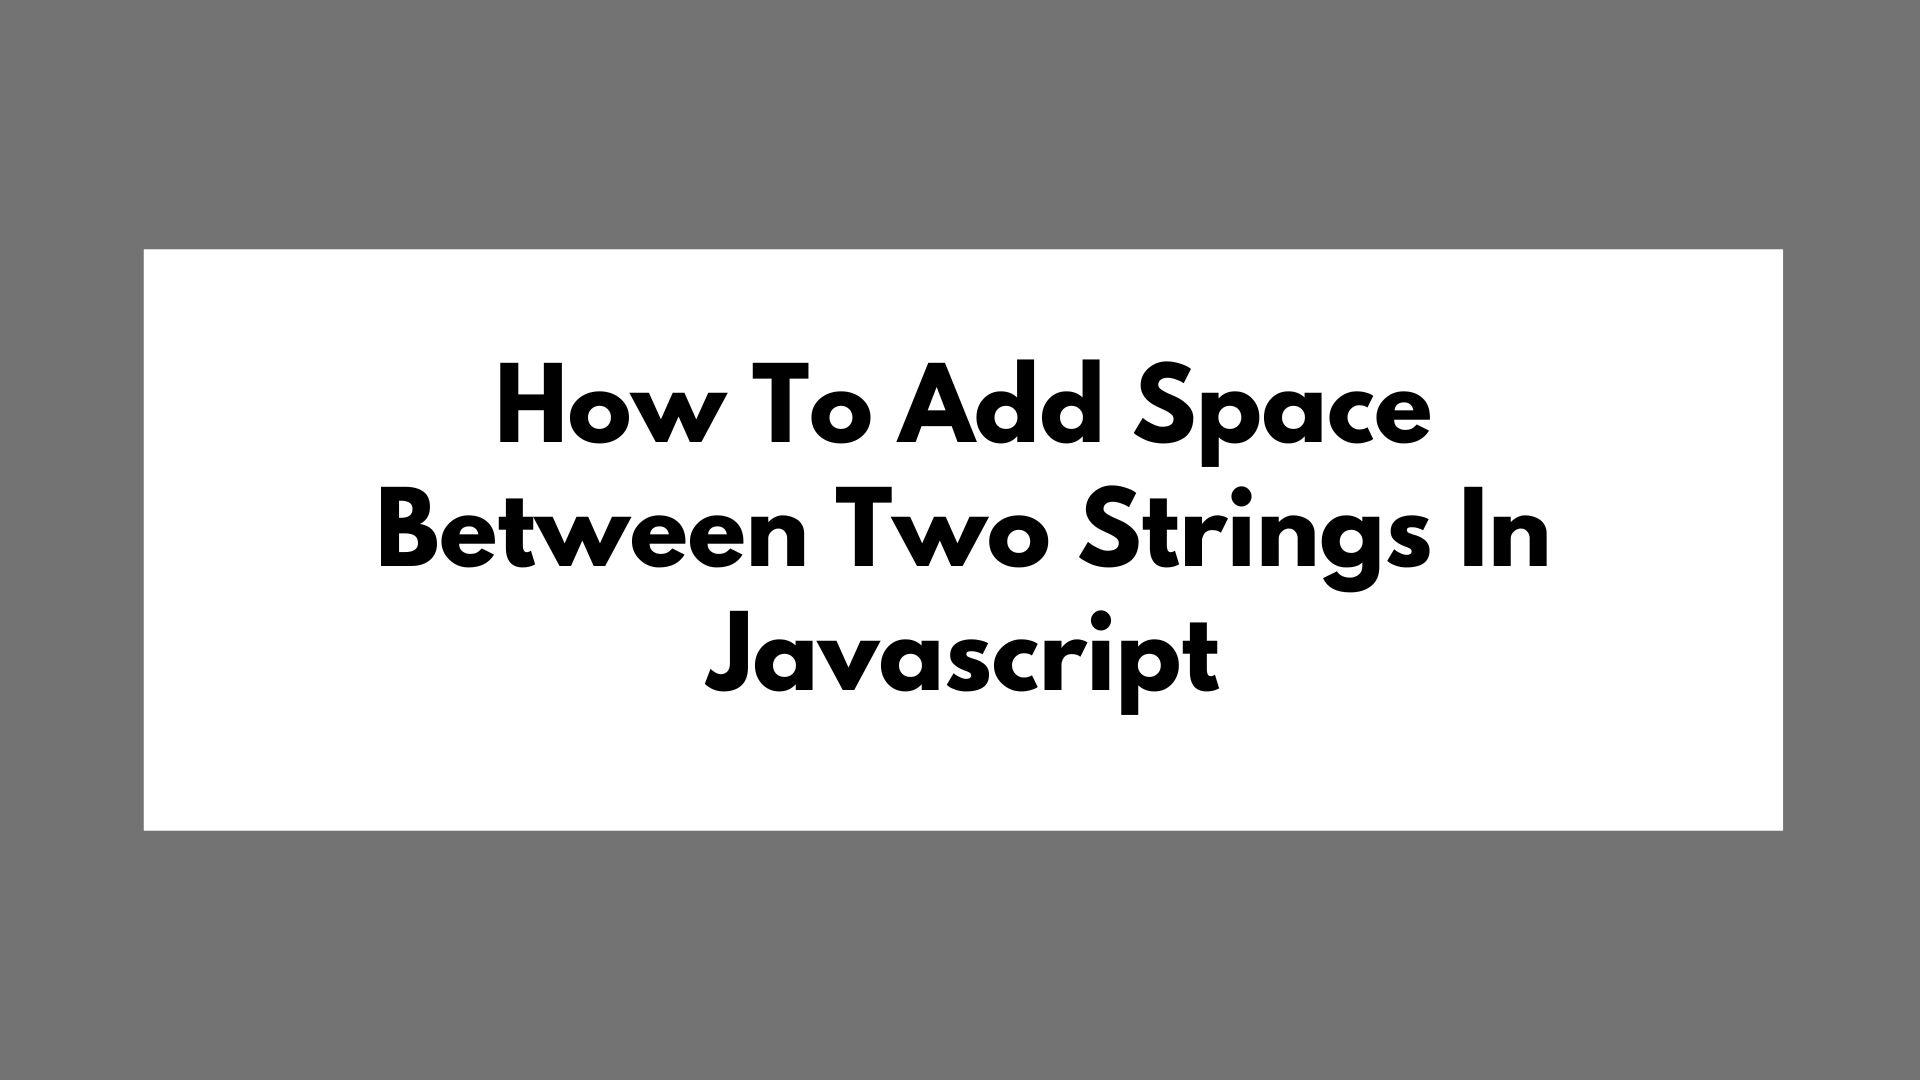 How To Add Space Between Two Strings In Javascript